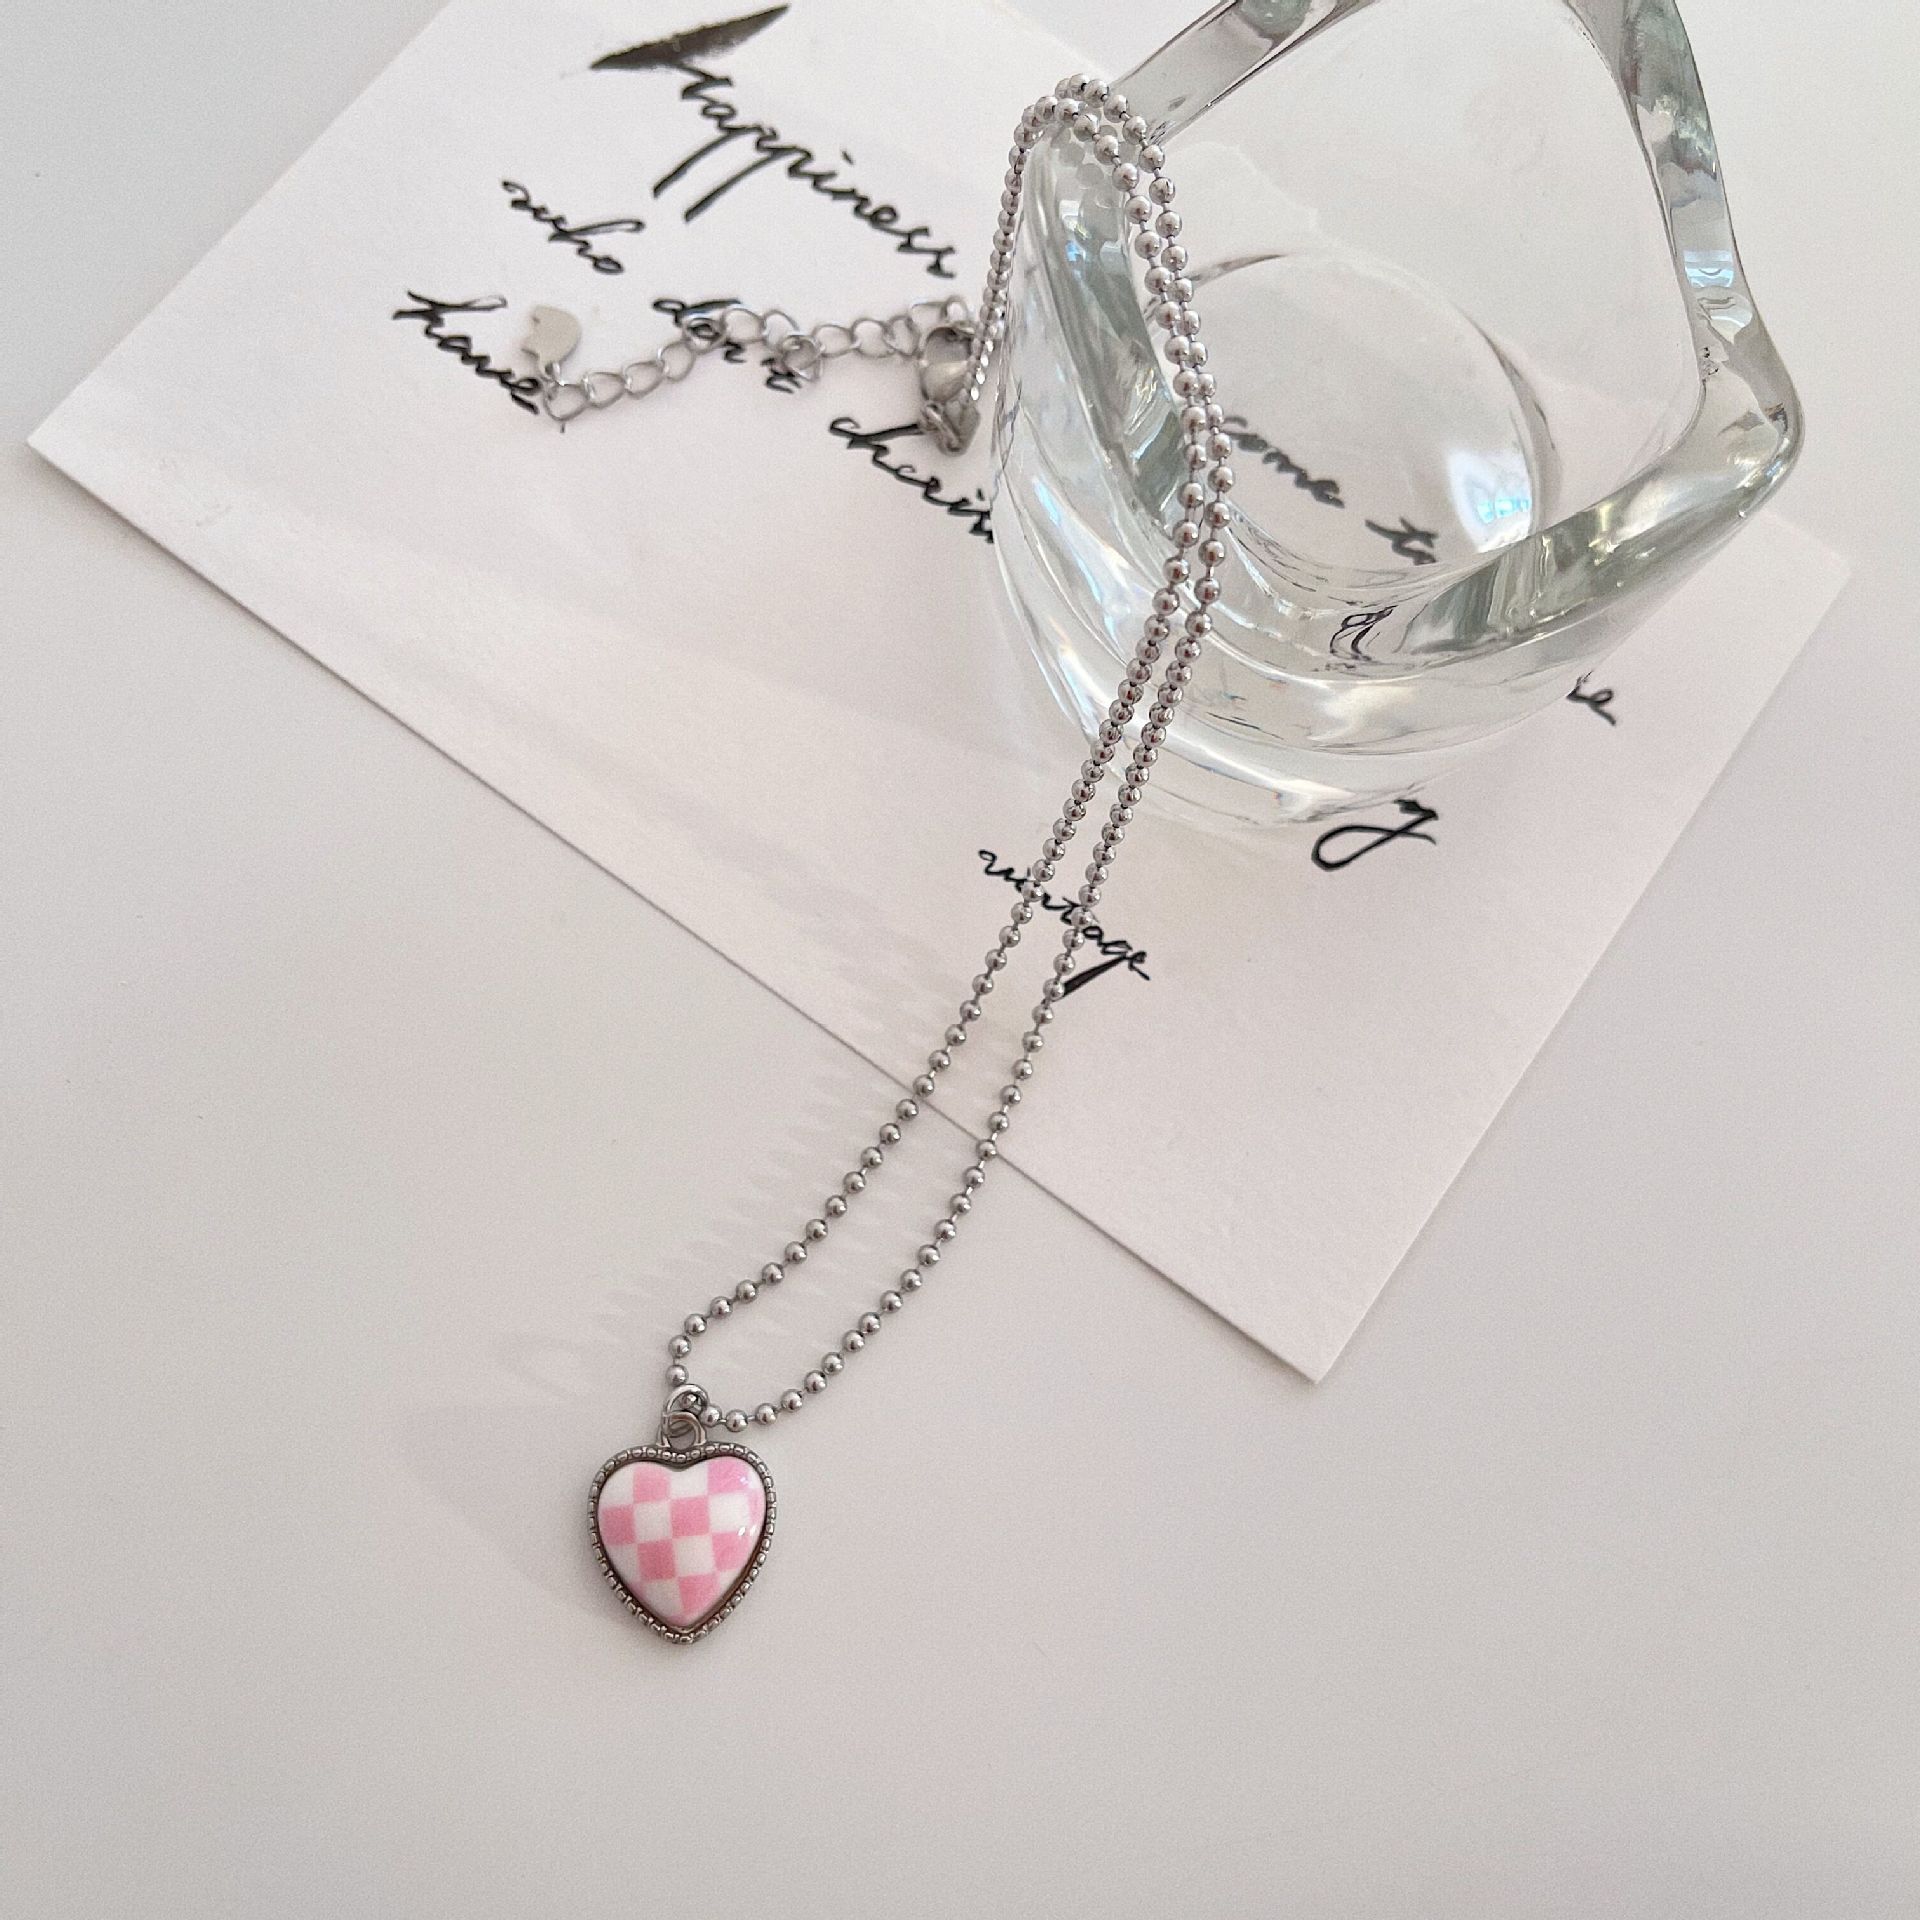 PLAID HEART NECKLACE - STAY FANCY